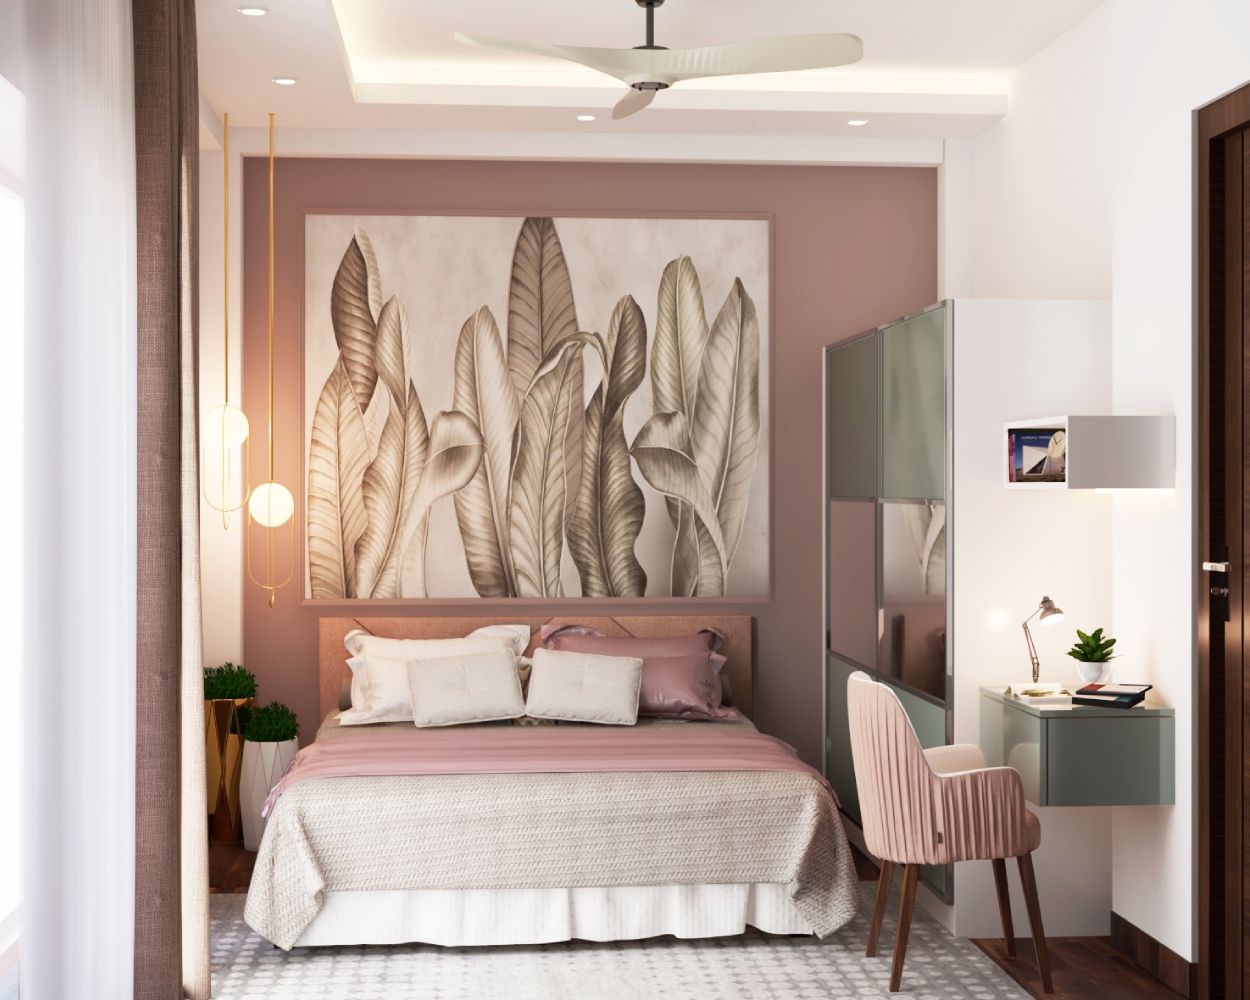 Contemporary Pink Guest Bedroom Design With Large Leafy Wall Art